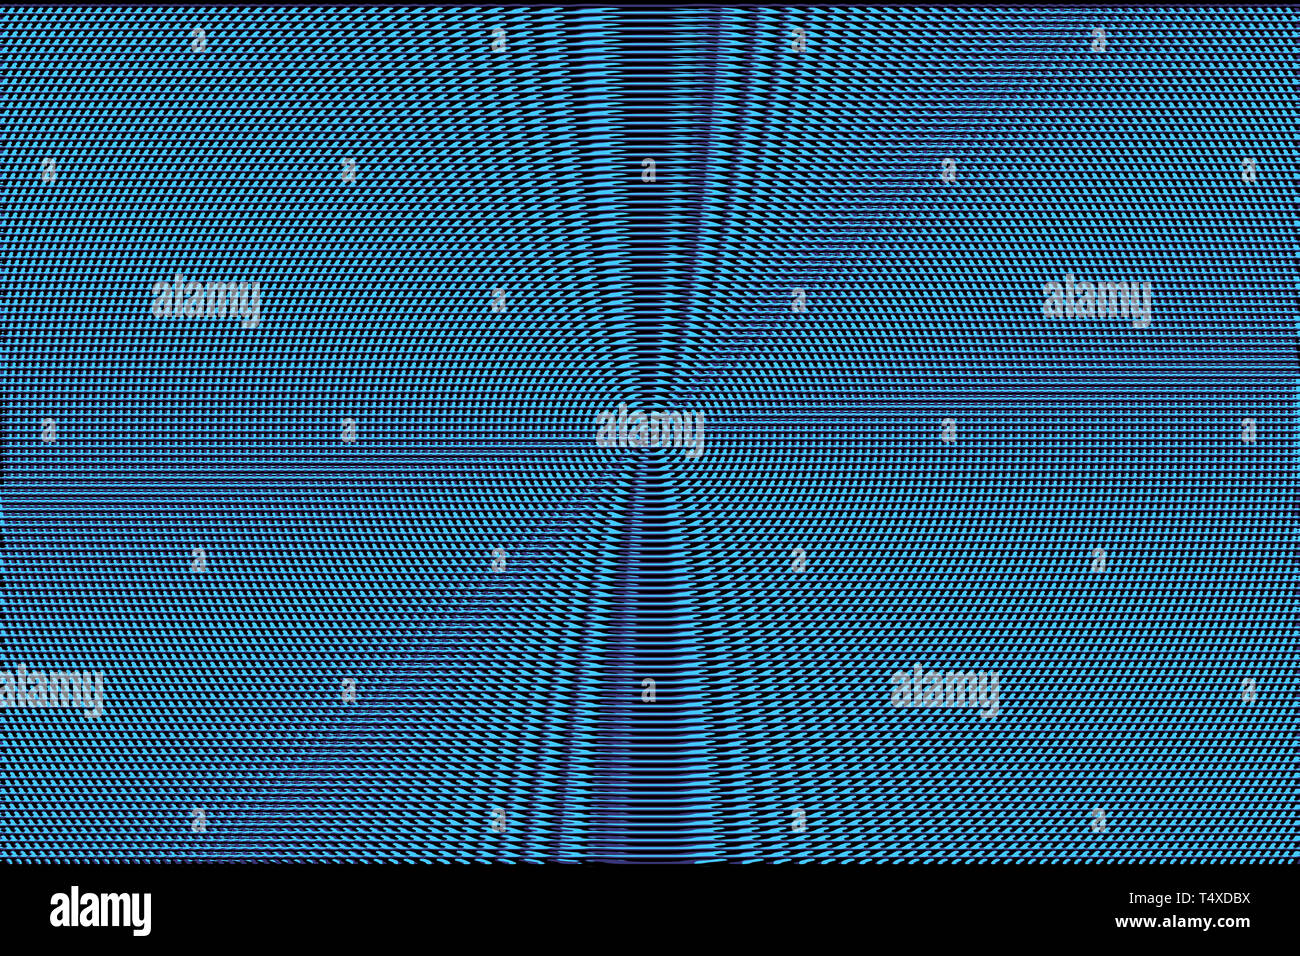 Blue neon halftone abstract background. Hypnotic optical illusion texture Stock Photo